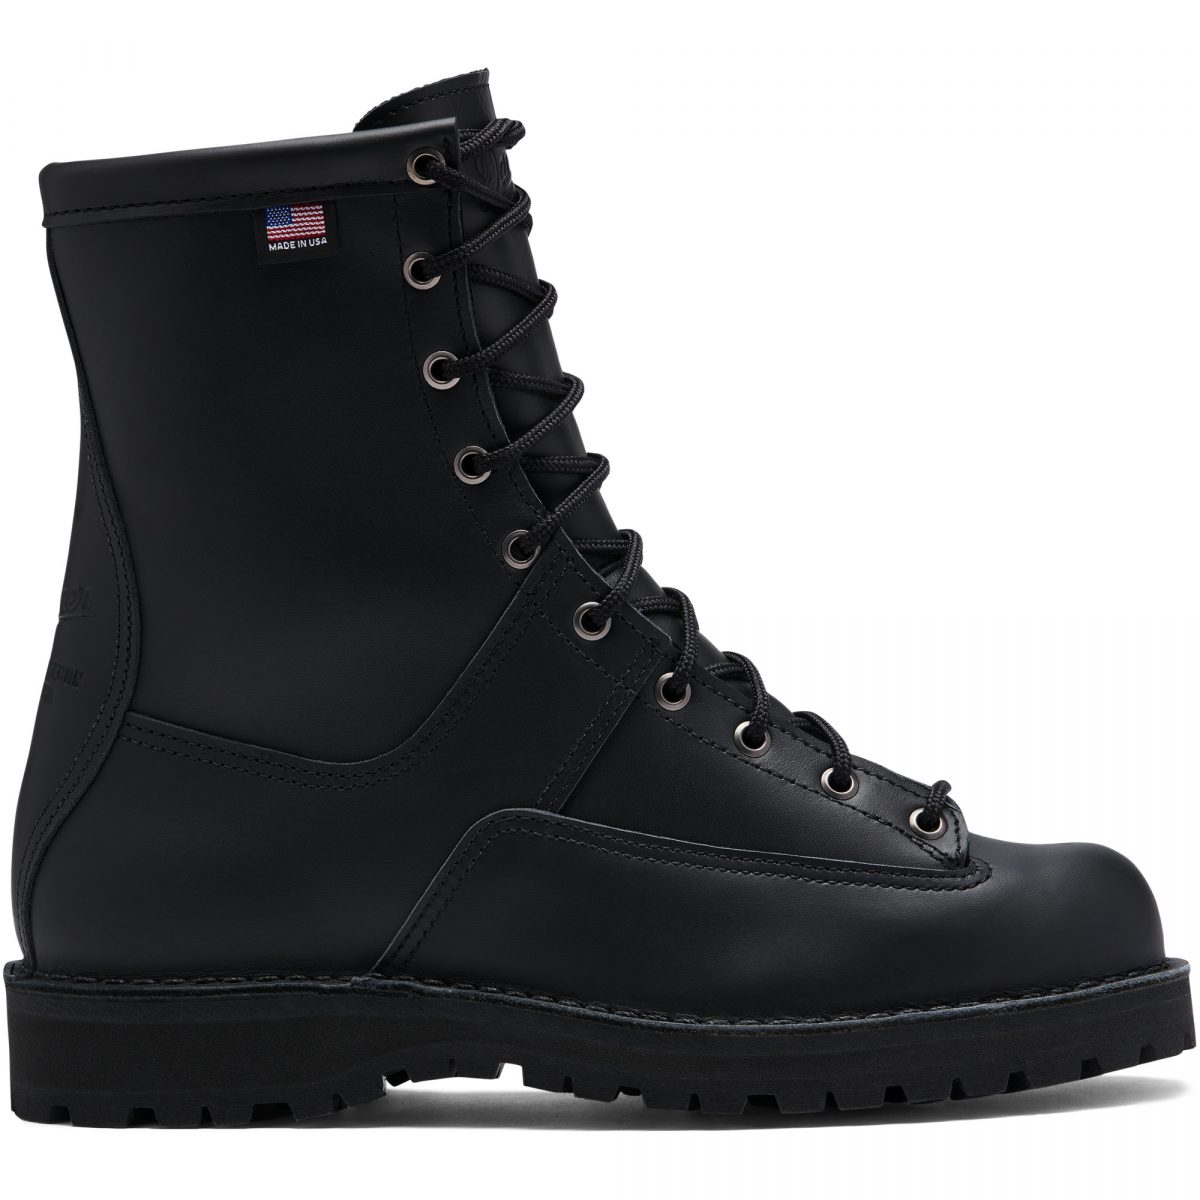 Danner Men?s Recon 8? Insulated 200G Boots 69410